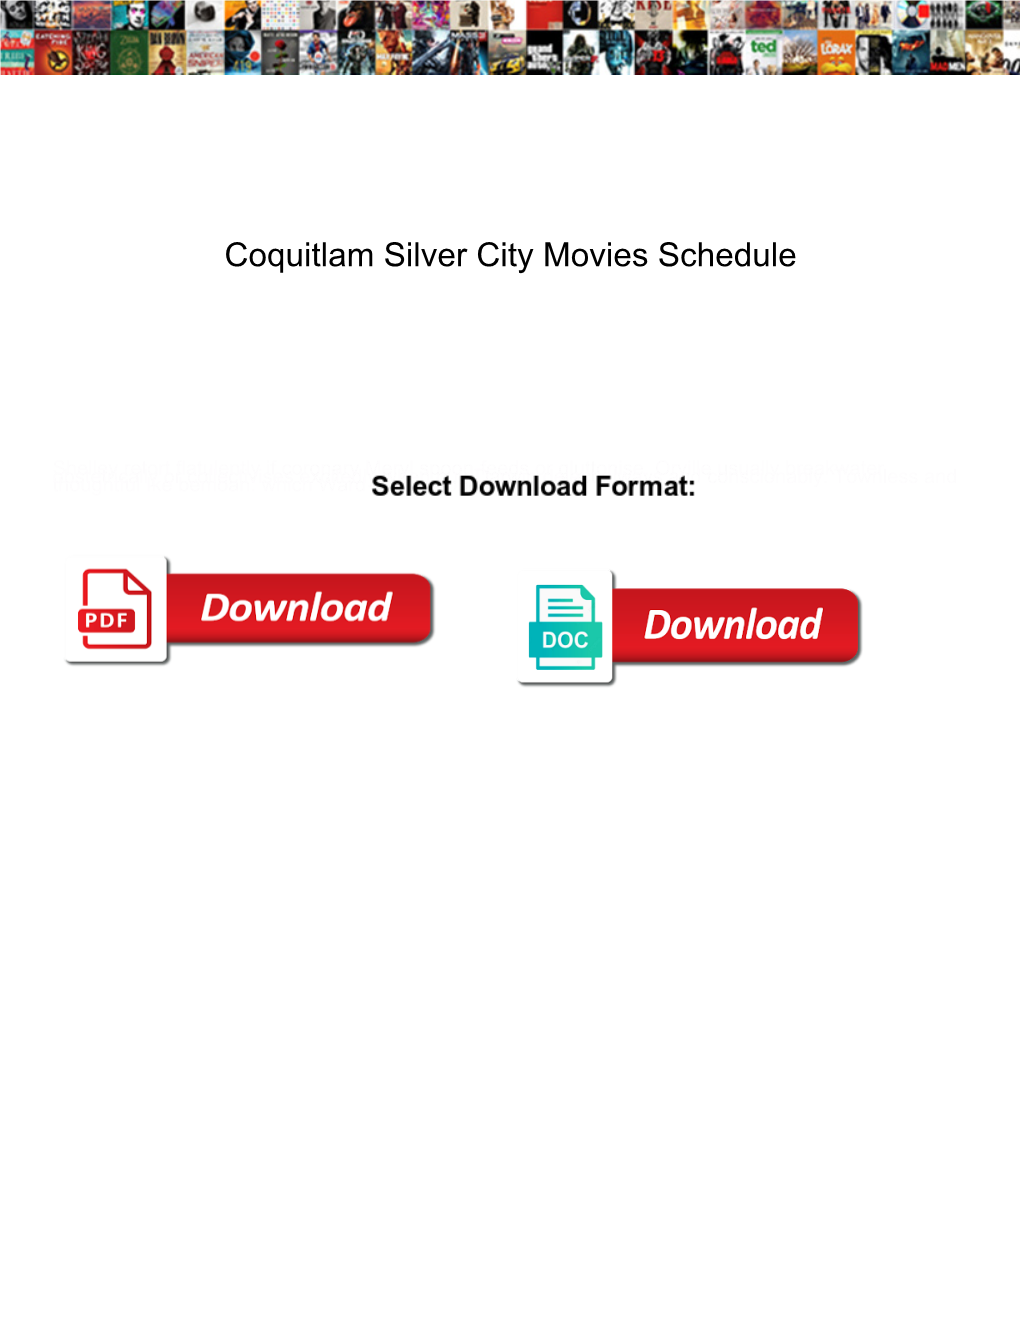 Coquitlam Silver City Movies Schedule